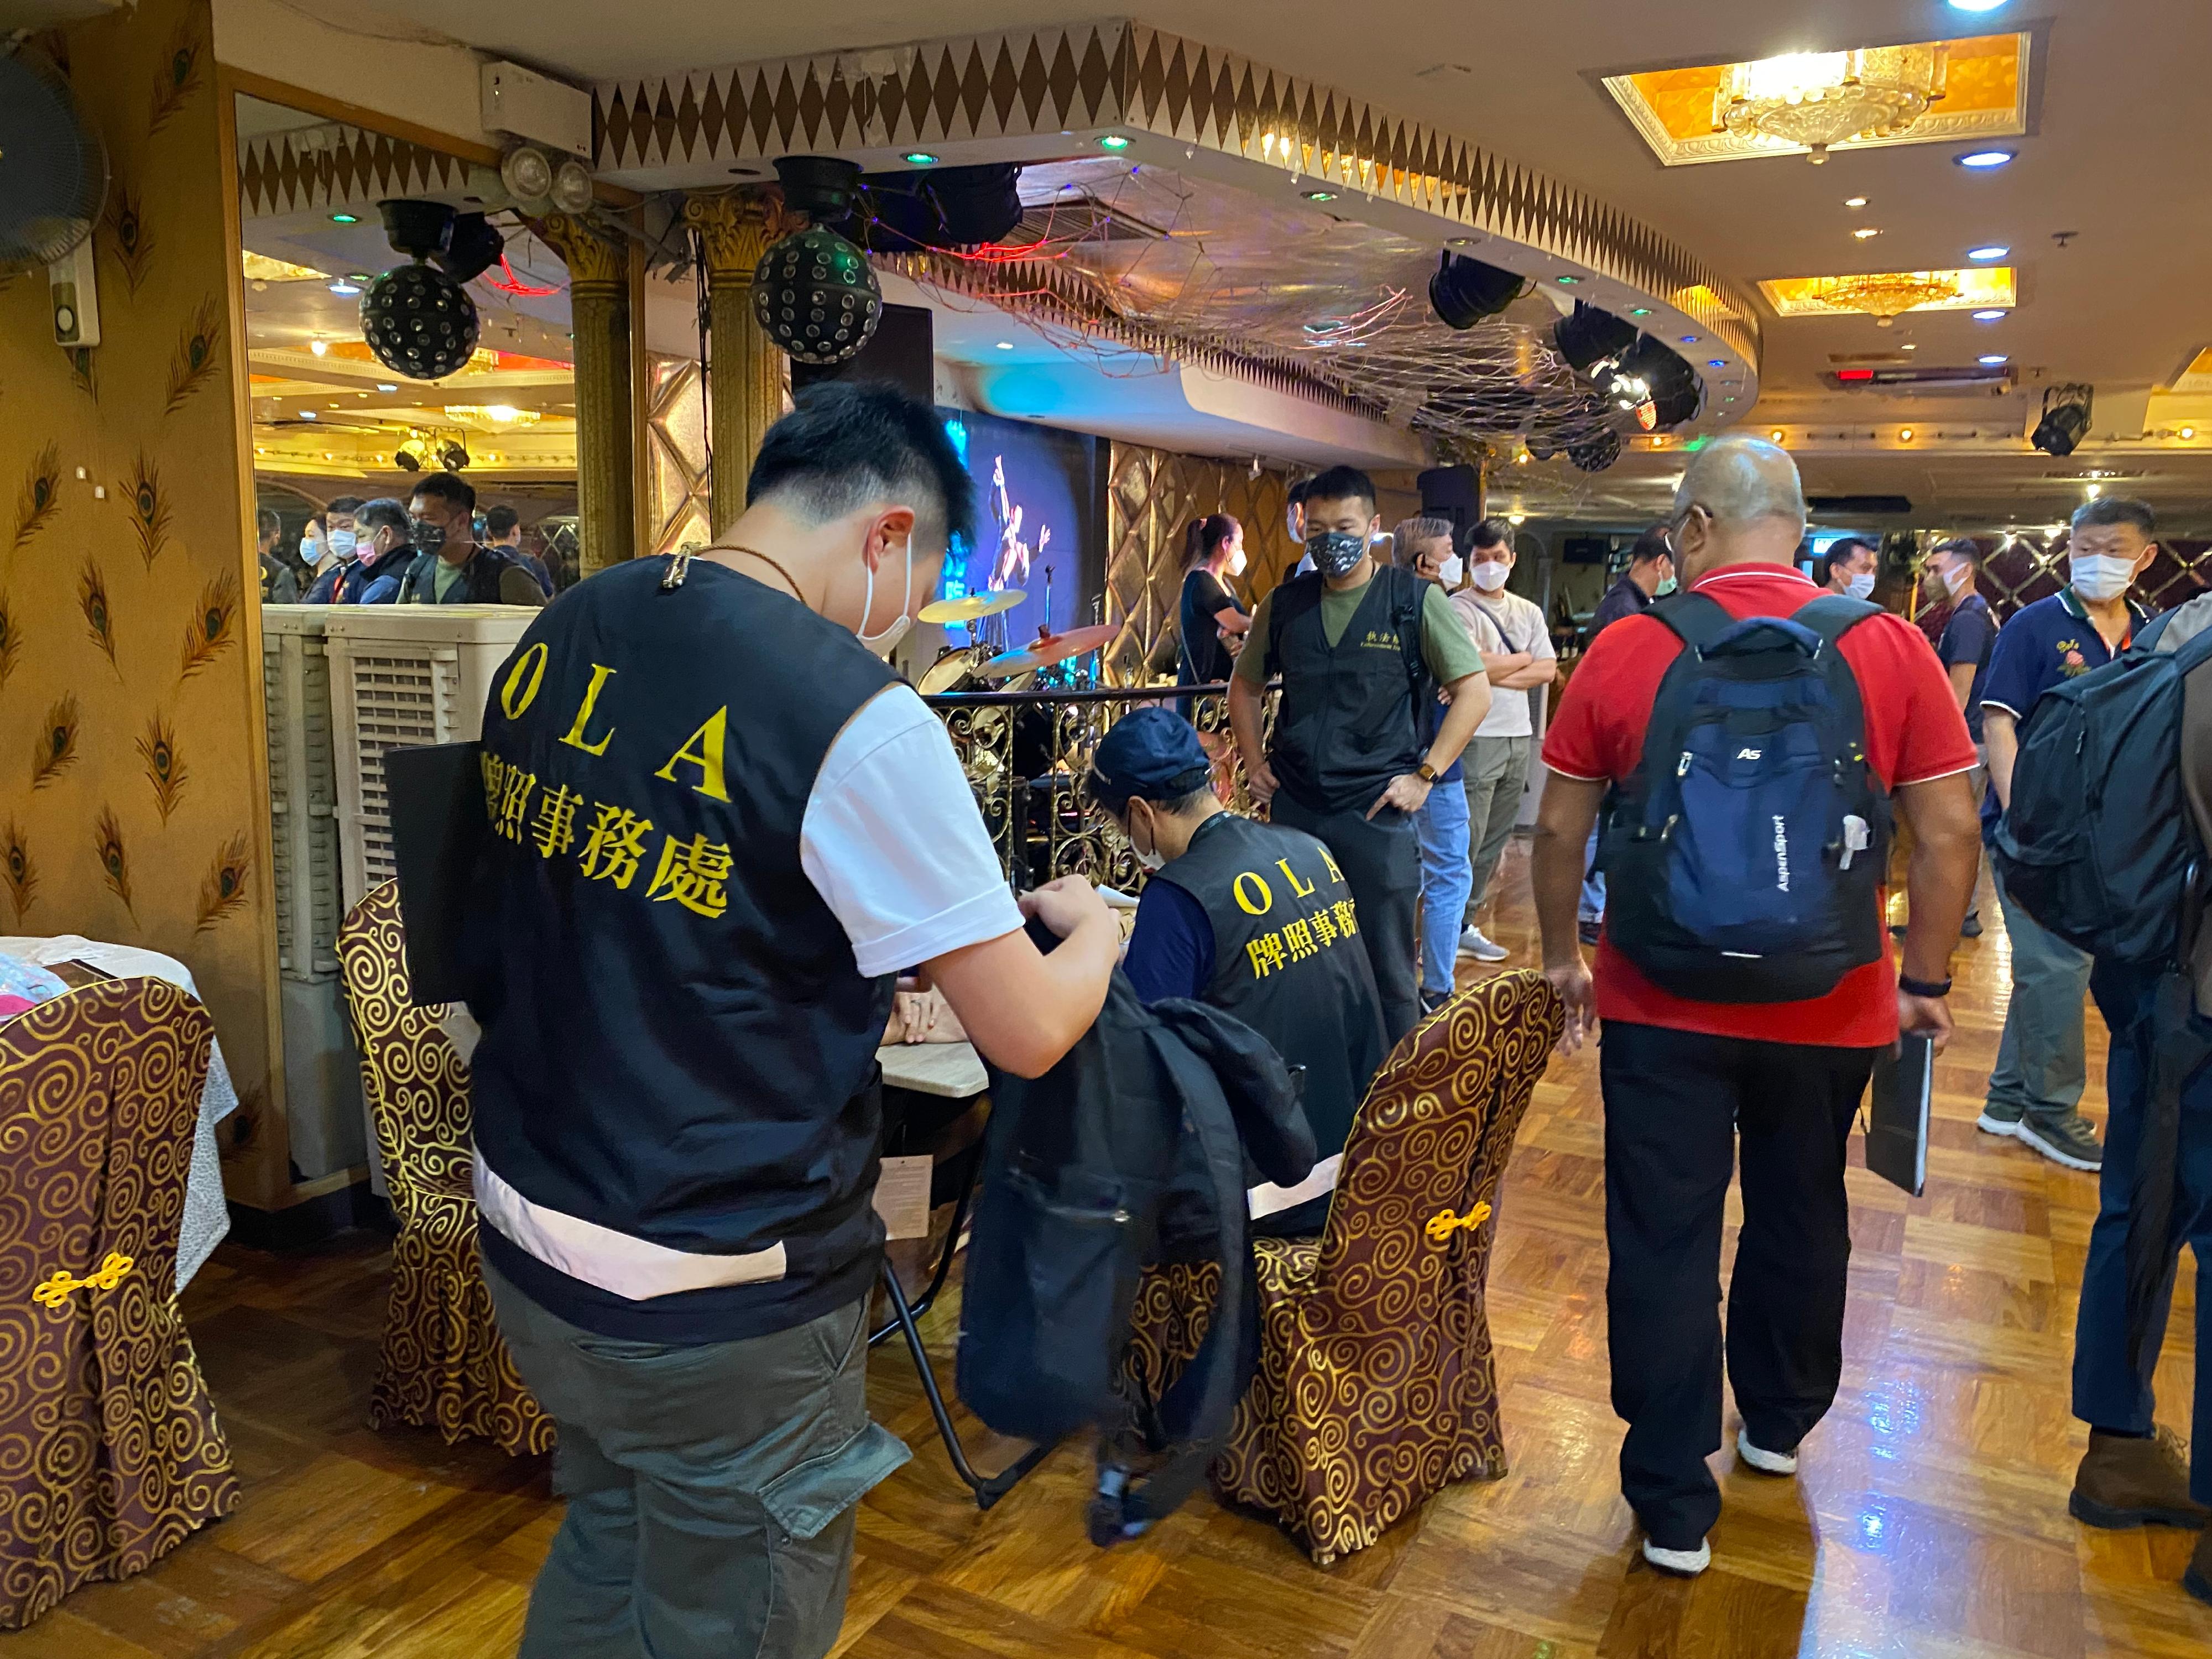 The Office of the Licensing Authority (OLA) under the Home Affairs Department conducted a blitz enforcement operation today (June 10) against a club-house located at 3/F, Golden Era Plaza in Mongkok, Kowloon, suspected of violating anti-epidemic regulations.  Photo shows OLA officers conducting the operation.